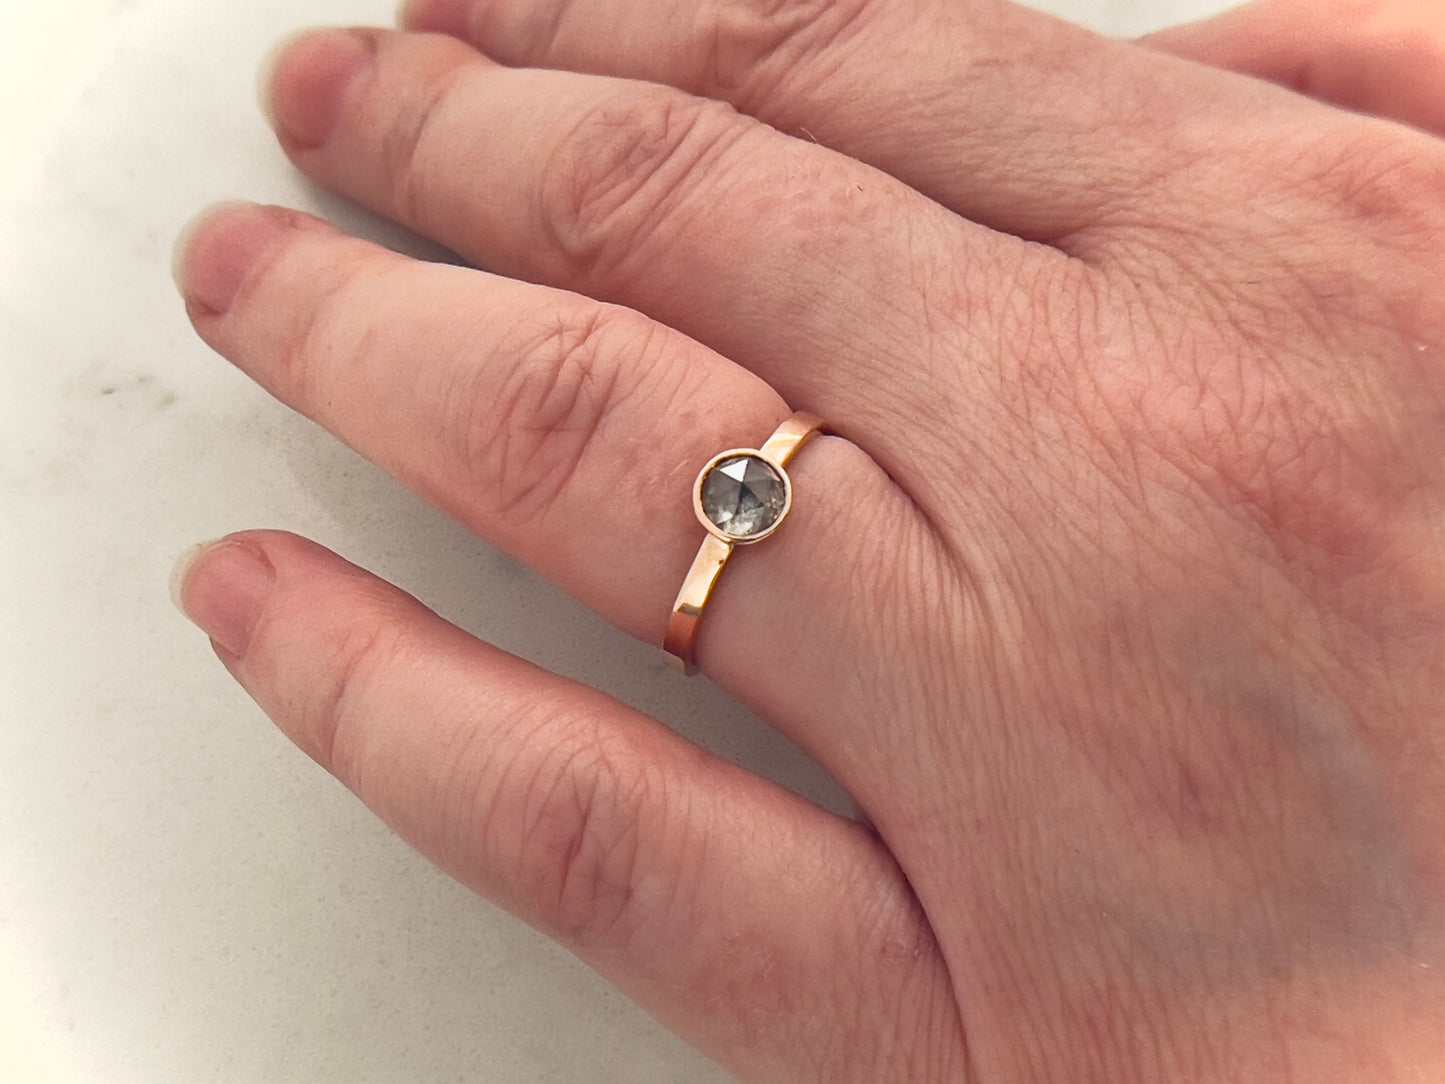 Half Carat Rose Cut Diamond Solitaire Engagement Ring with low tapered bezel in polished 14k rose gold, Ready to ship